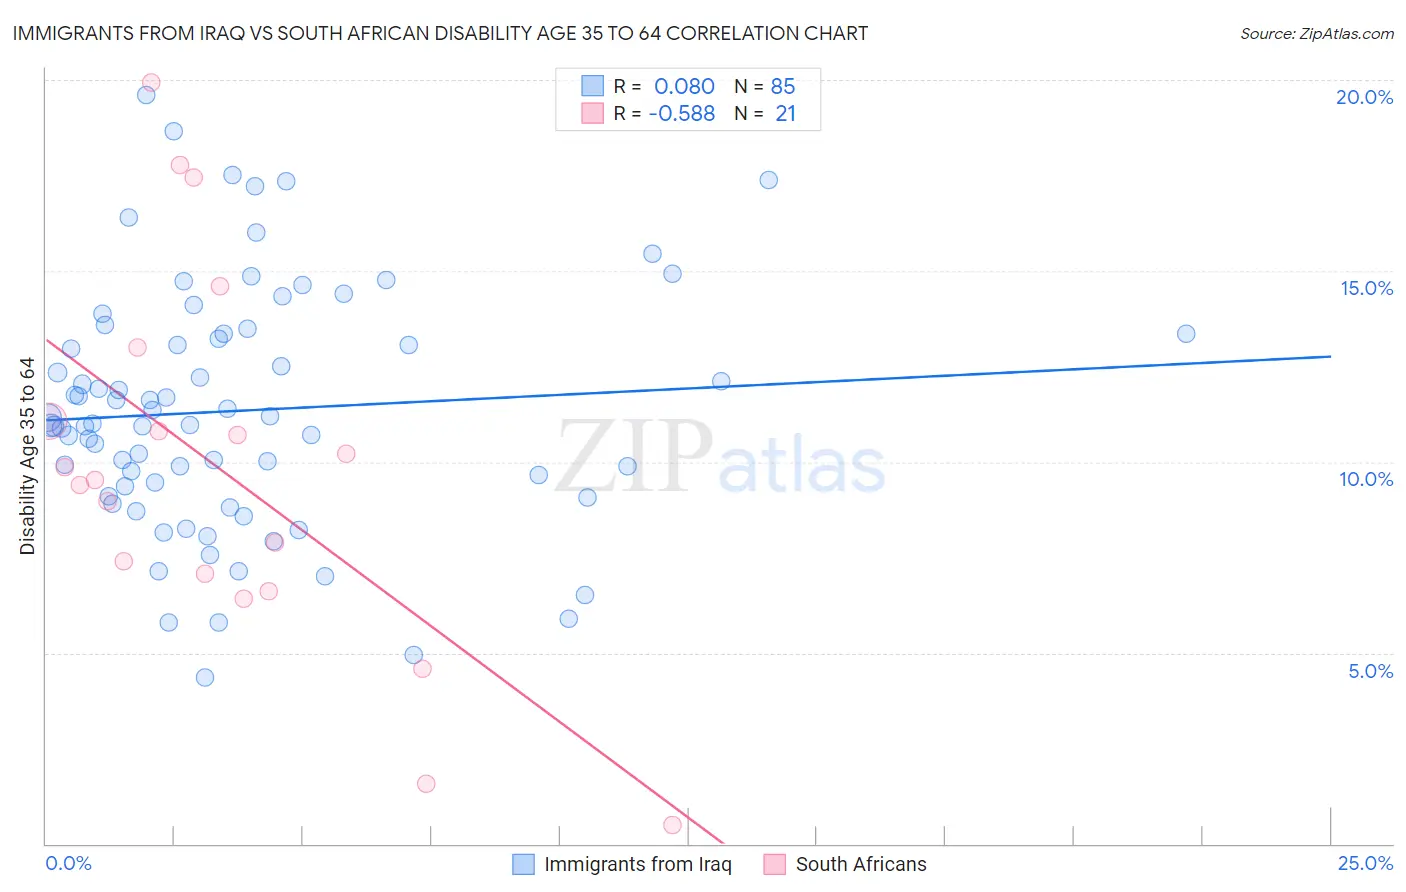 Immigrants from Iraq vs South African Disability Age 35 to 64